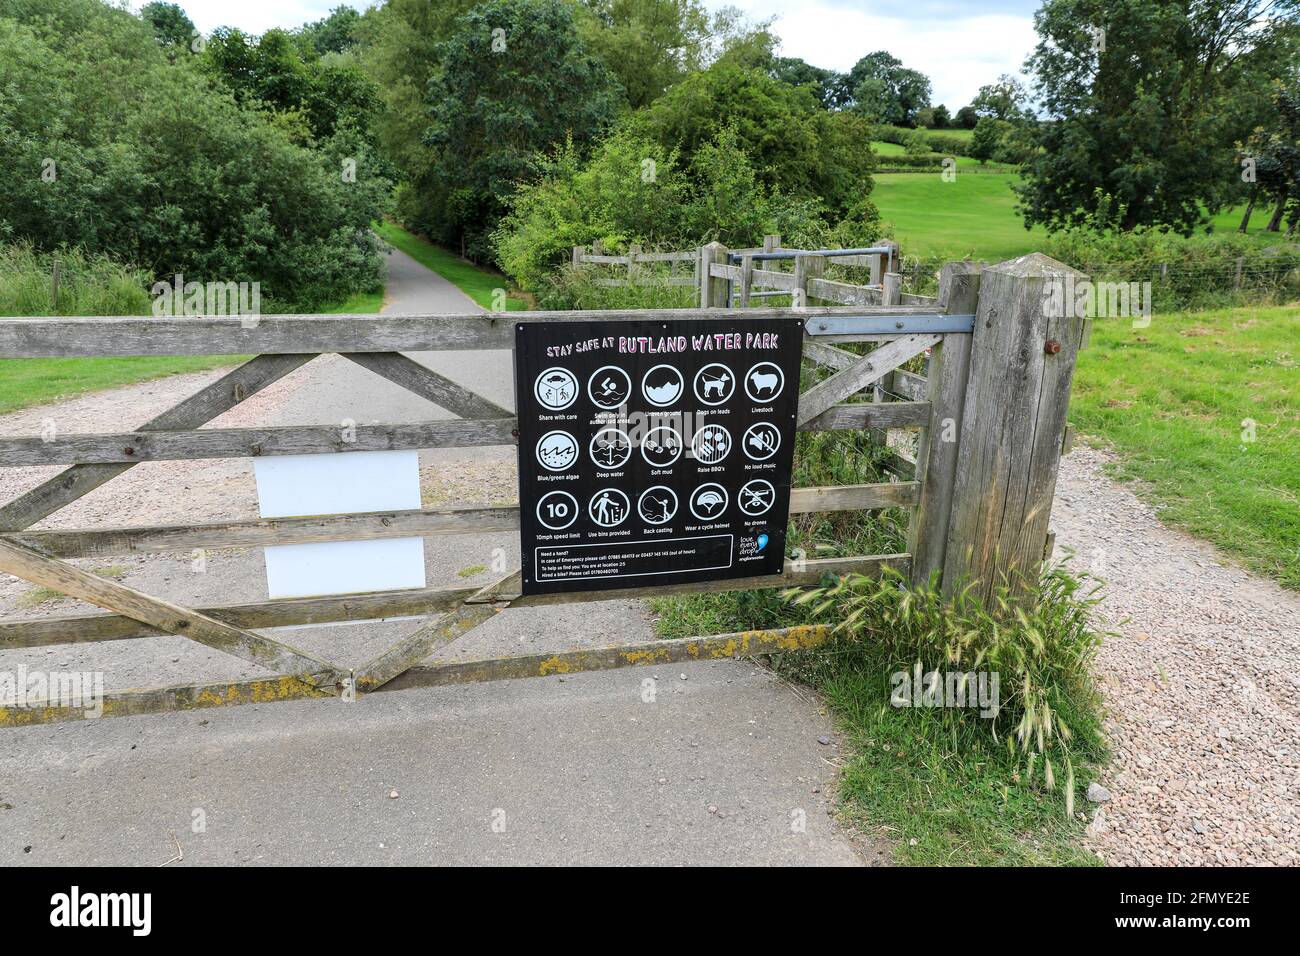 An information board or sign on a wooden gate outlining how to stay safe at Rutland Water, Rutland, England, UK Stock Photo